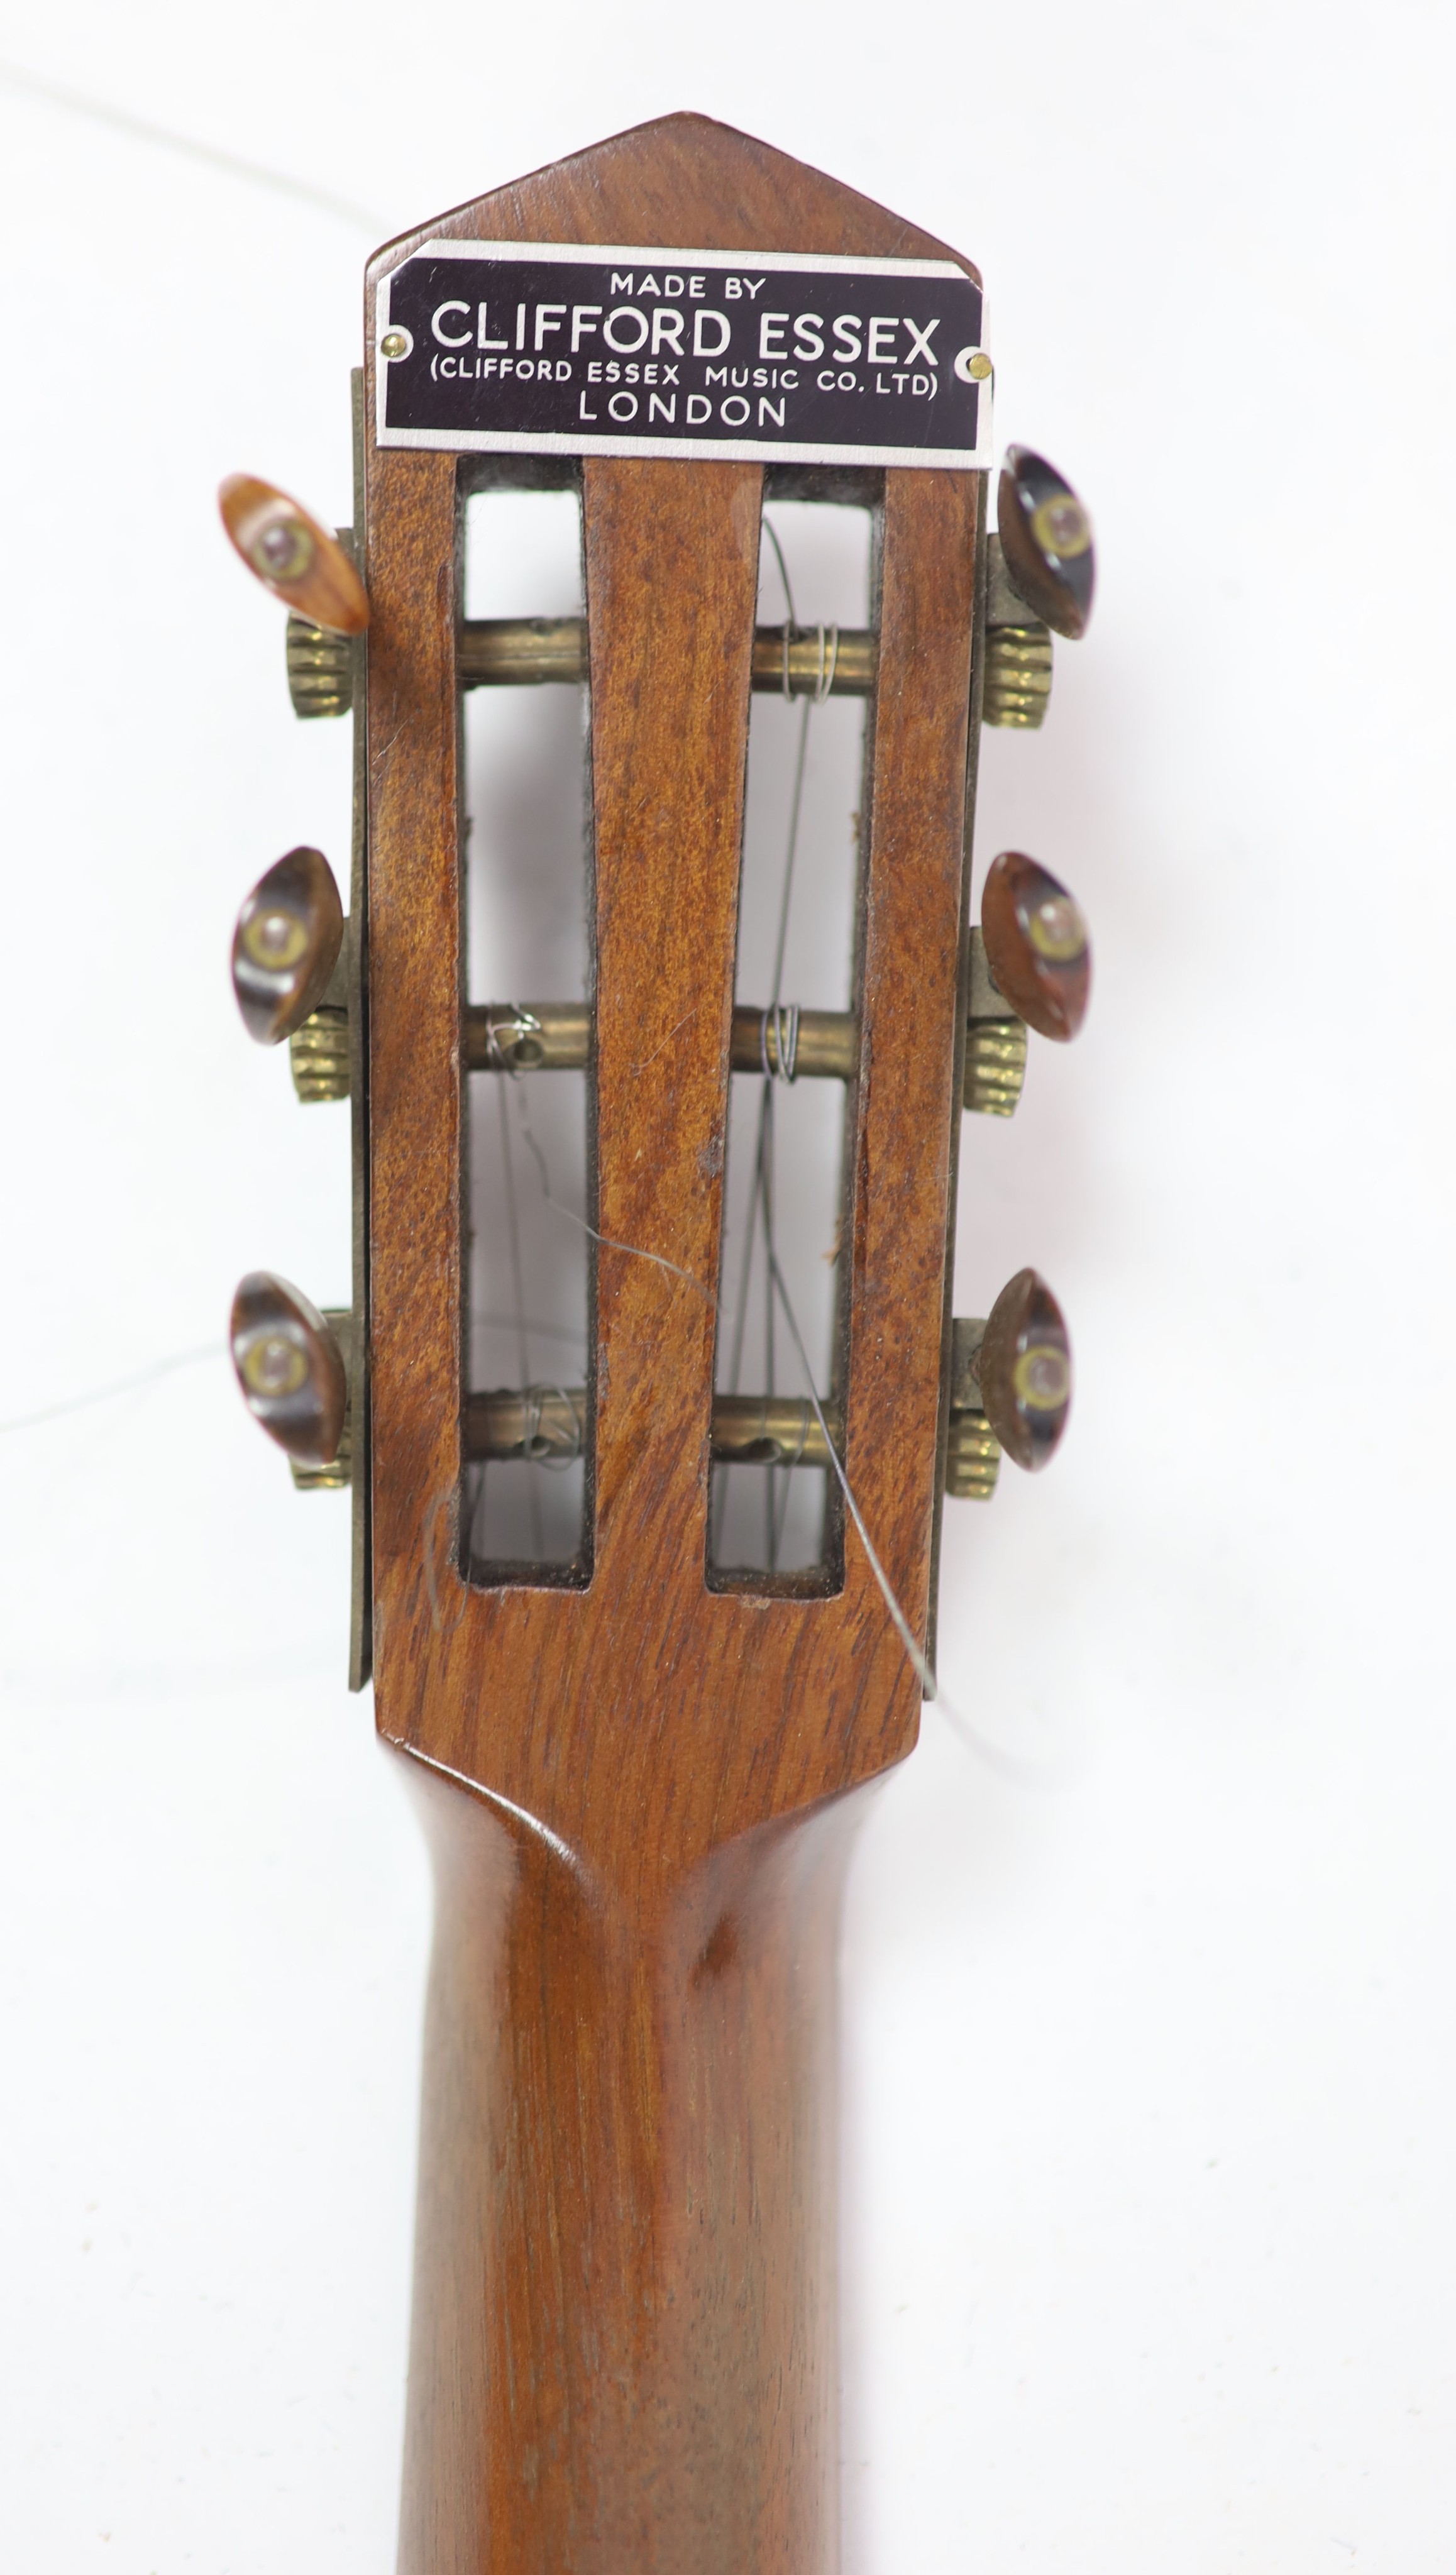 A Clifford Essex banjo overall 90cm, with distressed leather case